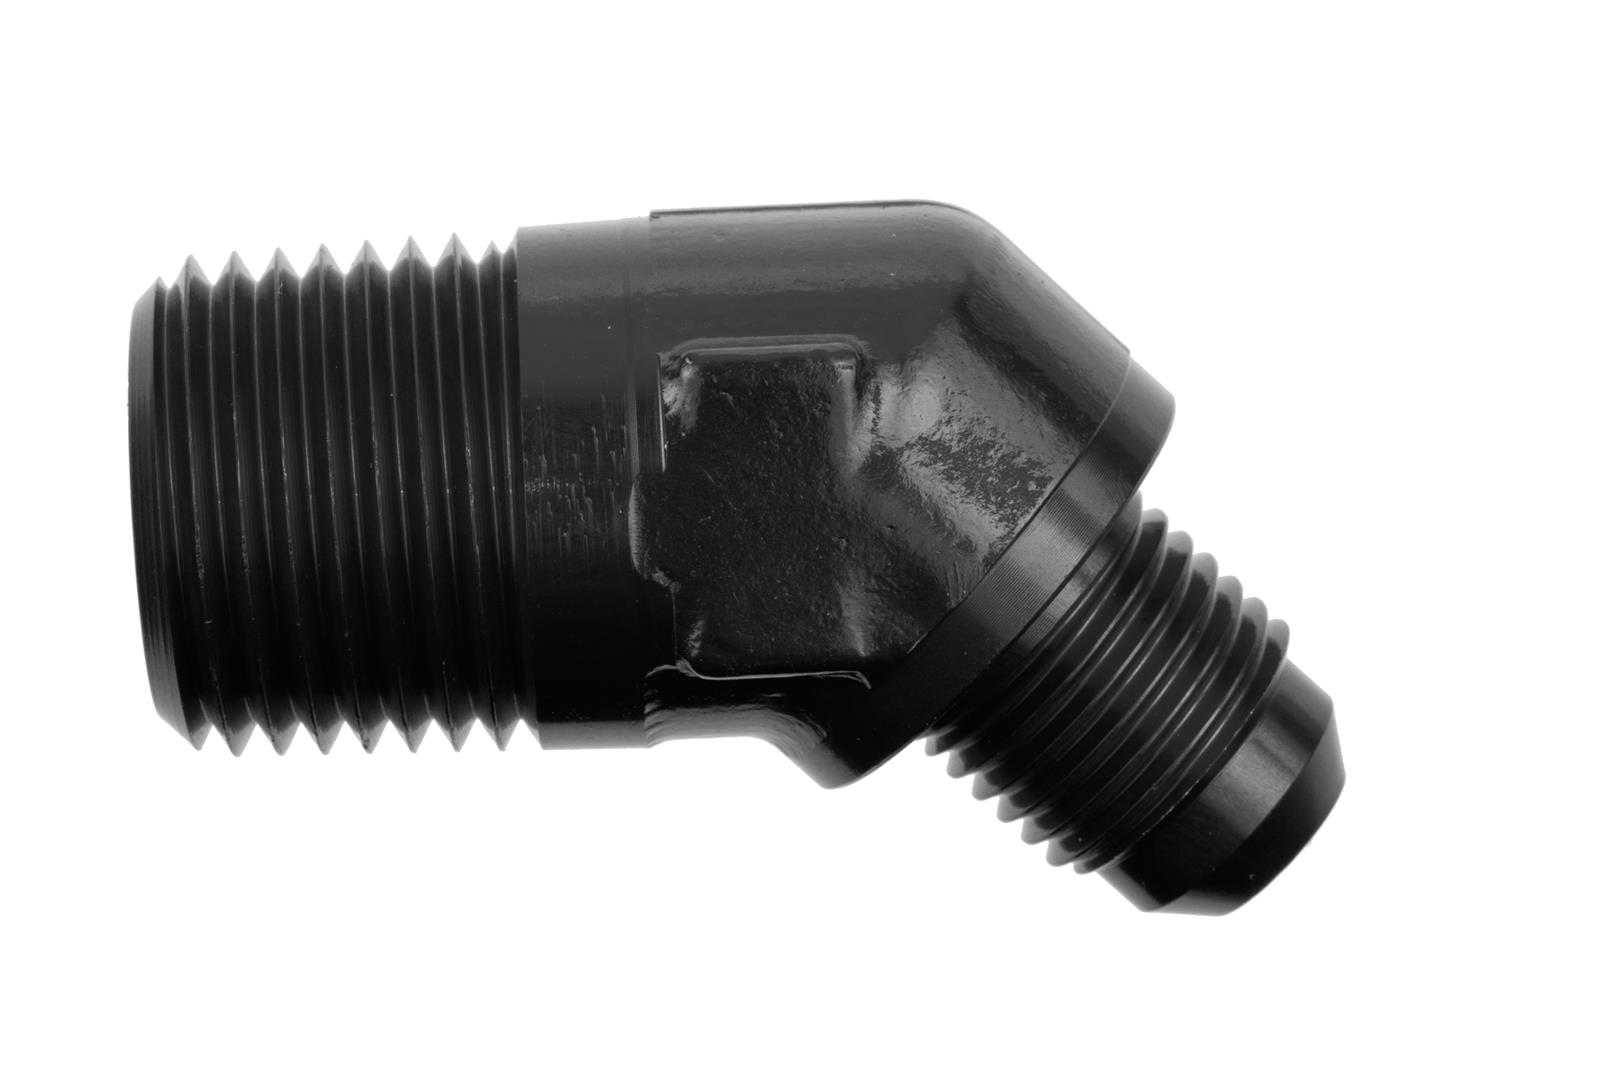 Redhorse -06 male to 1/8″ NPT male adapter, 45 degree-black